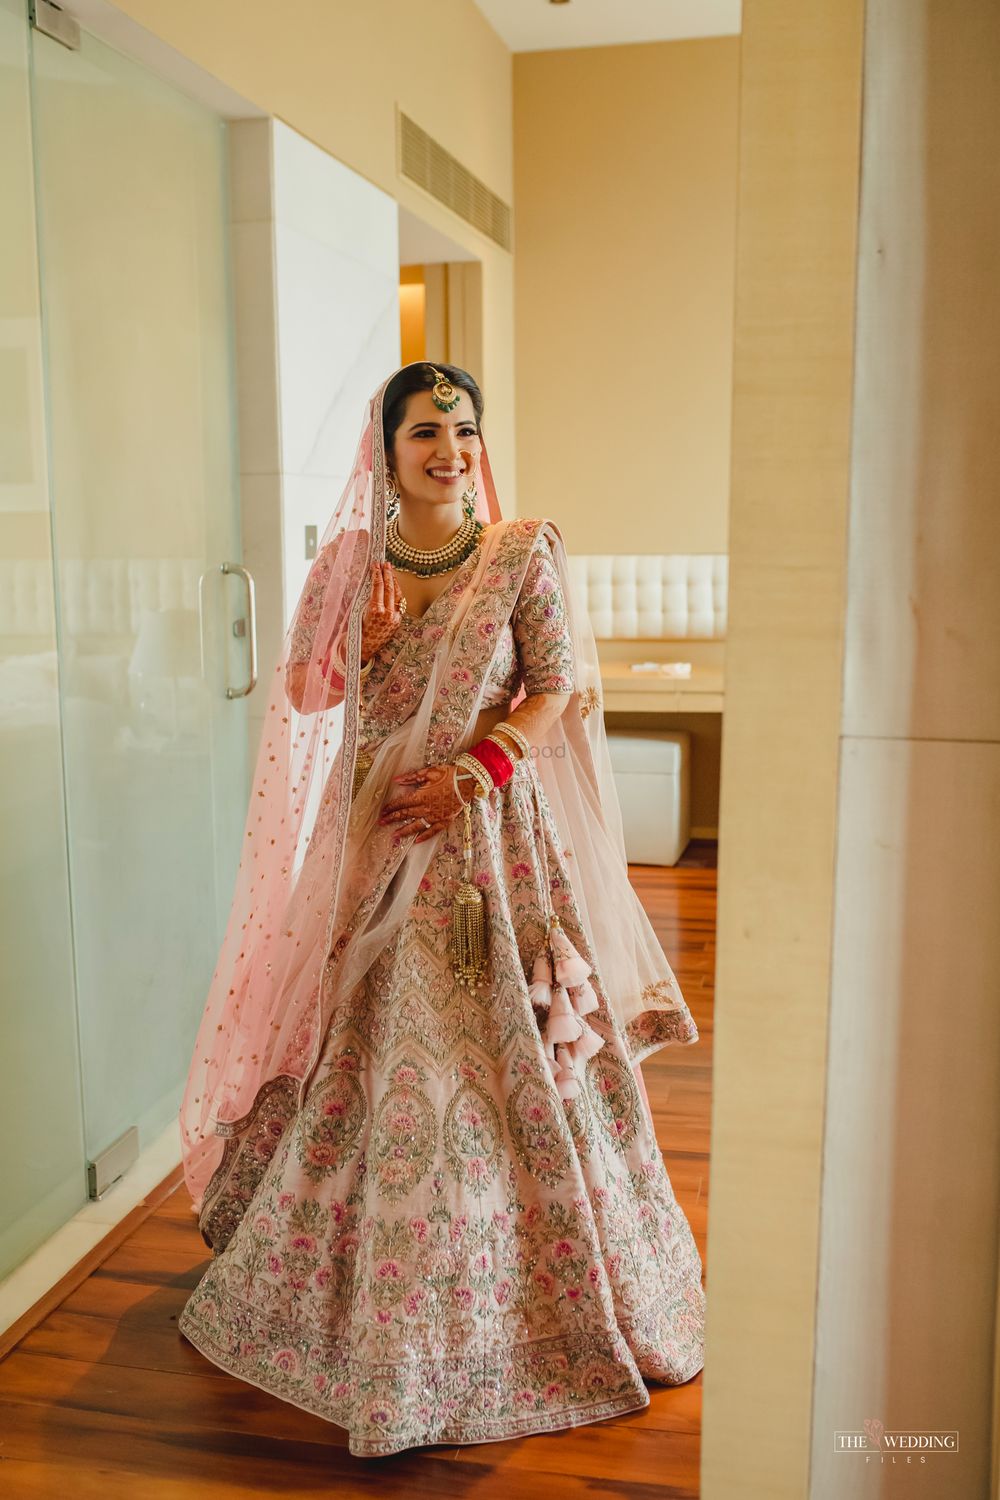 Photo of Bride dressed in a baby pink lehenga